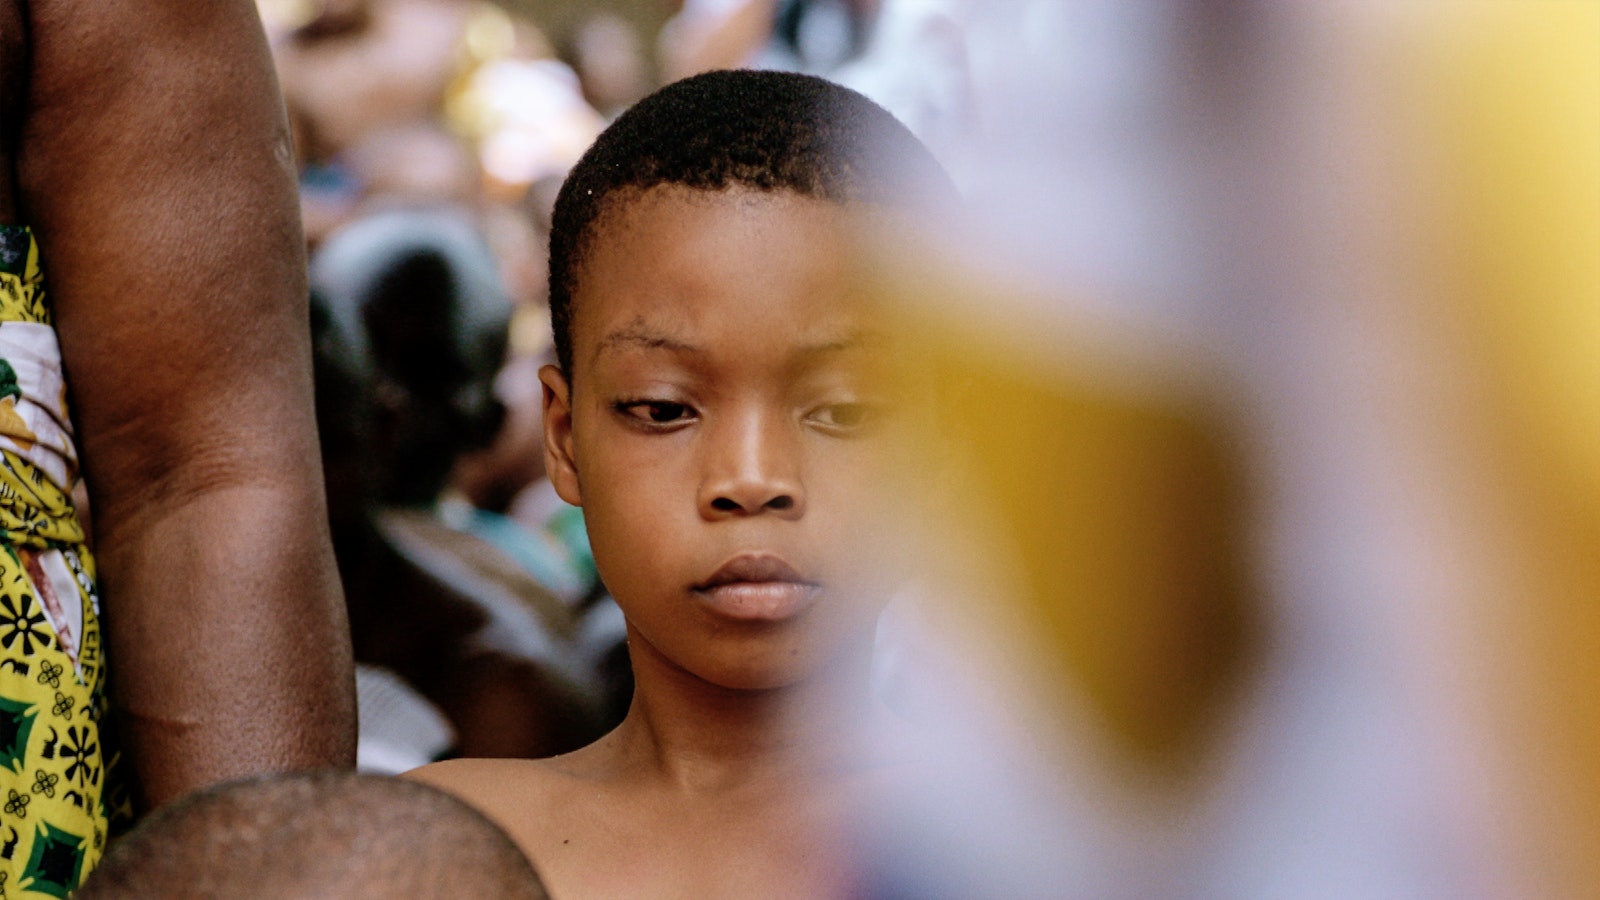 Backed by a crowd of people, a young boy attends the Ashanti nation's cultural celebration.